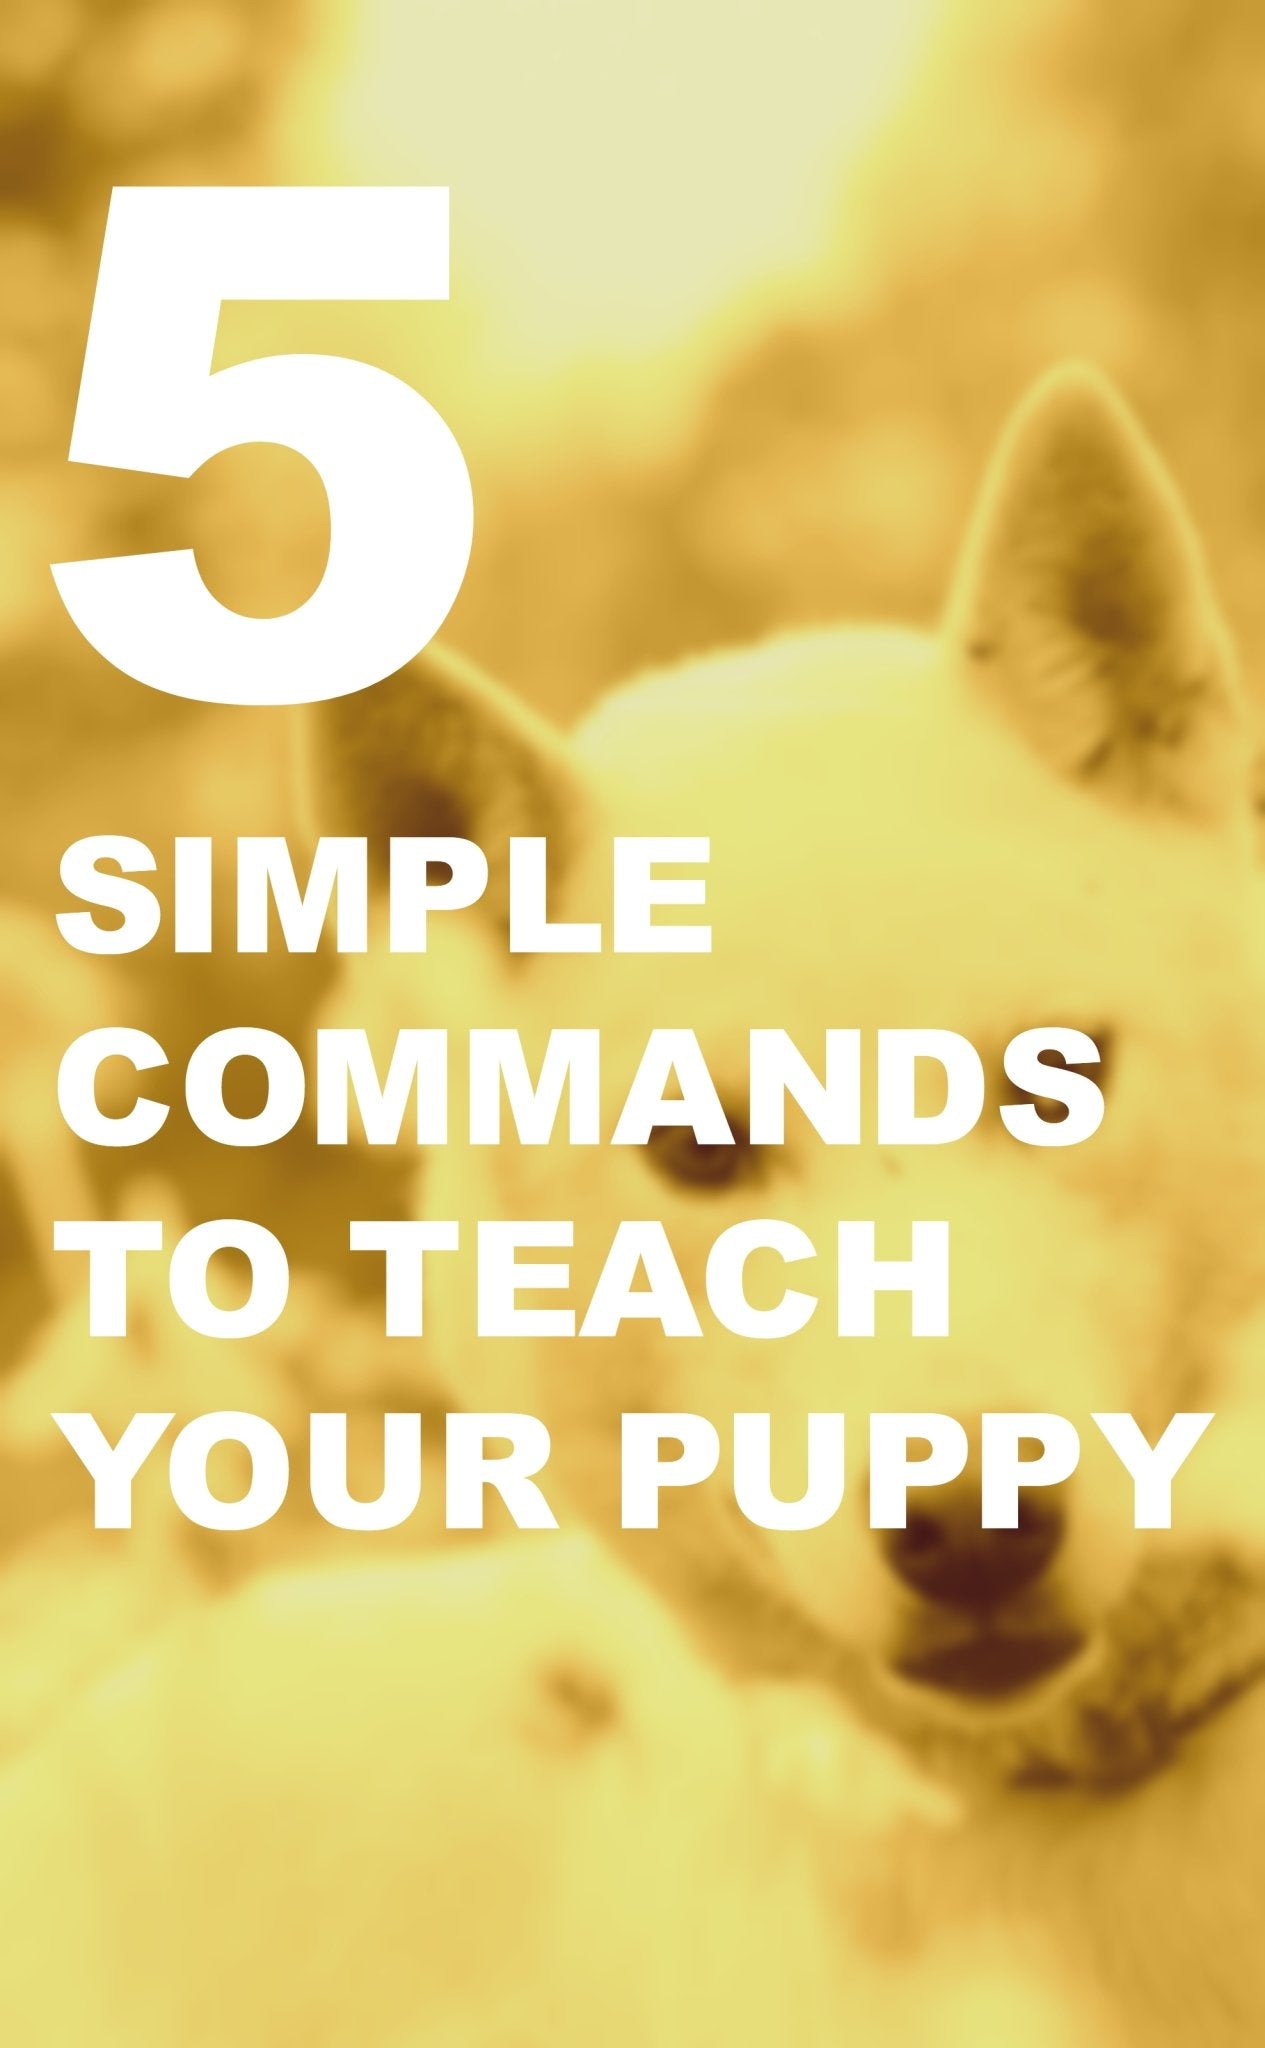 5 Simple Commands to Teach Your Puppy - Woolly Wolf